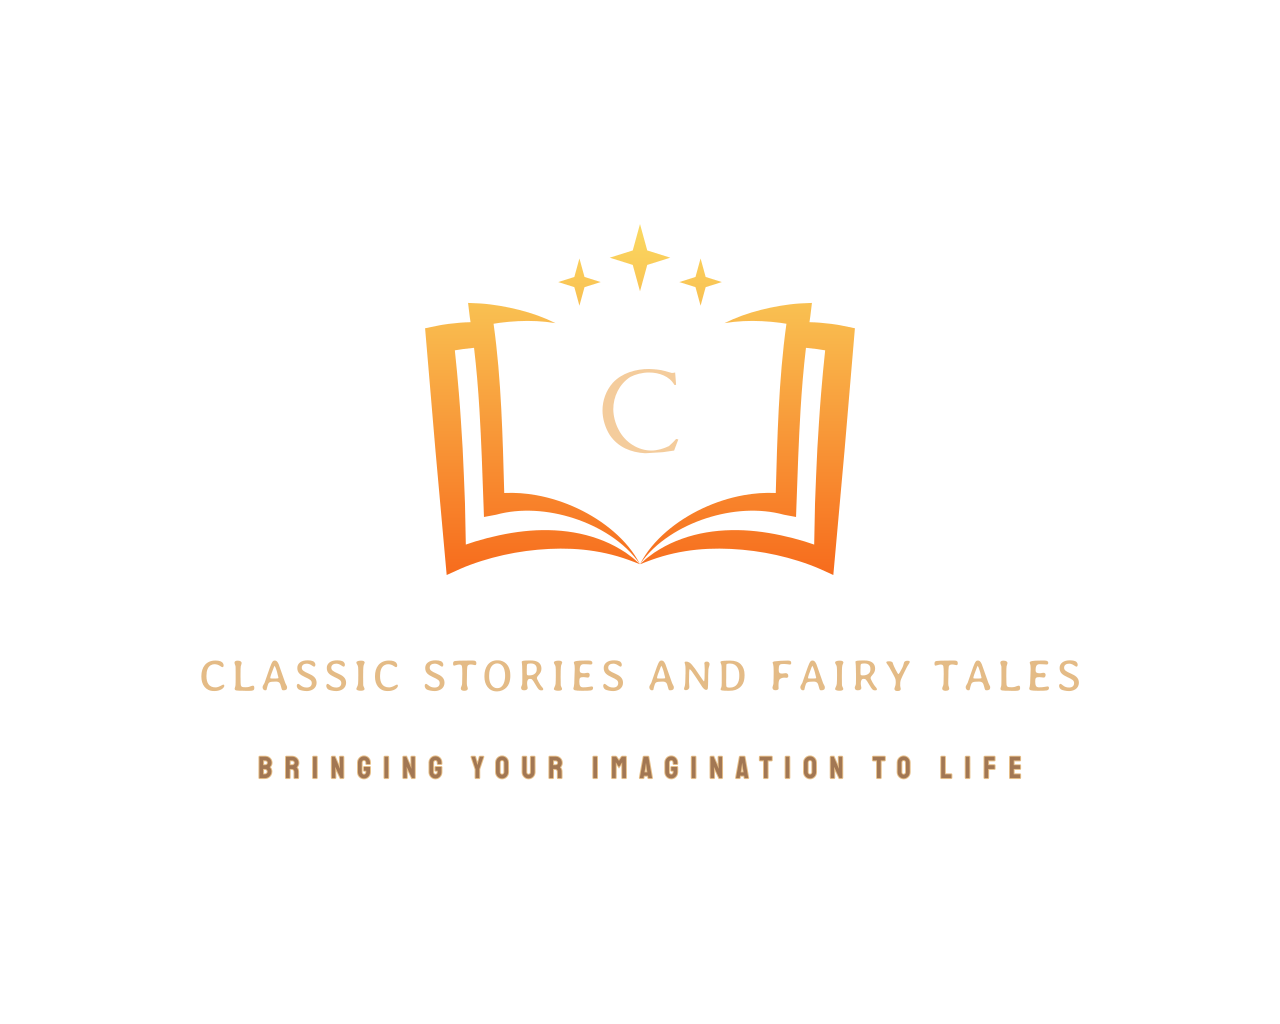 CLASSIC STORIES AND FAIRY TALES's logo